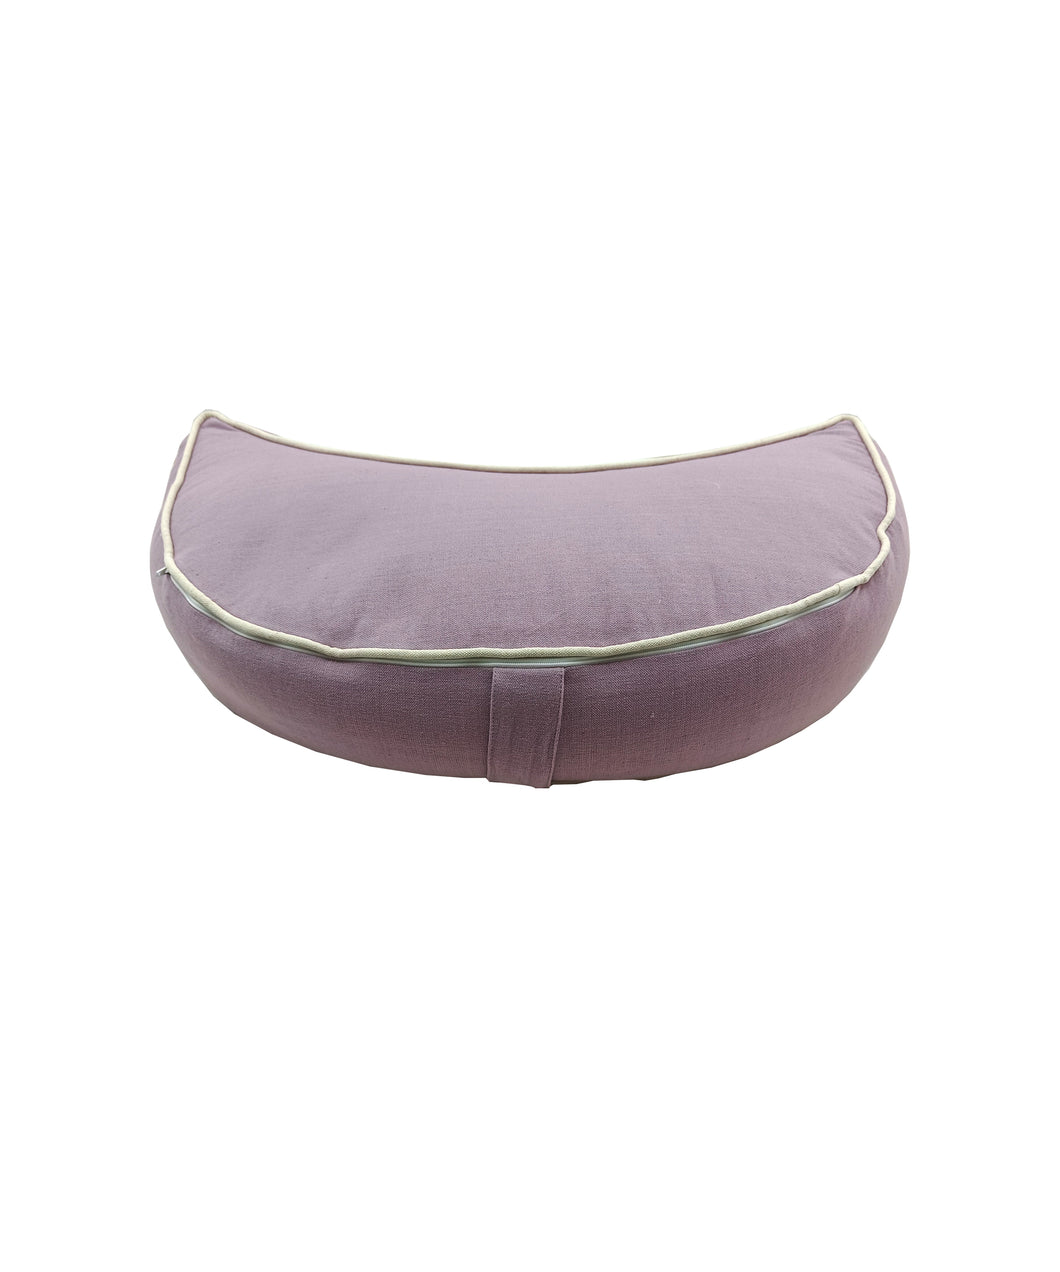 Meditation Cushion Crescent Shaped Zafu Filled With Buckwheat Hulls - Solid Lilac Crescent Cushion with Piping